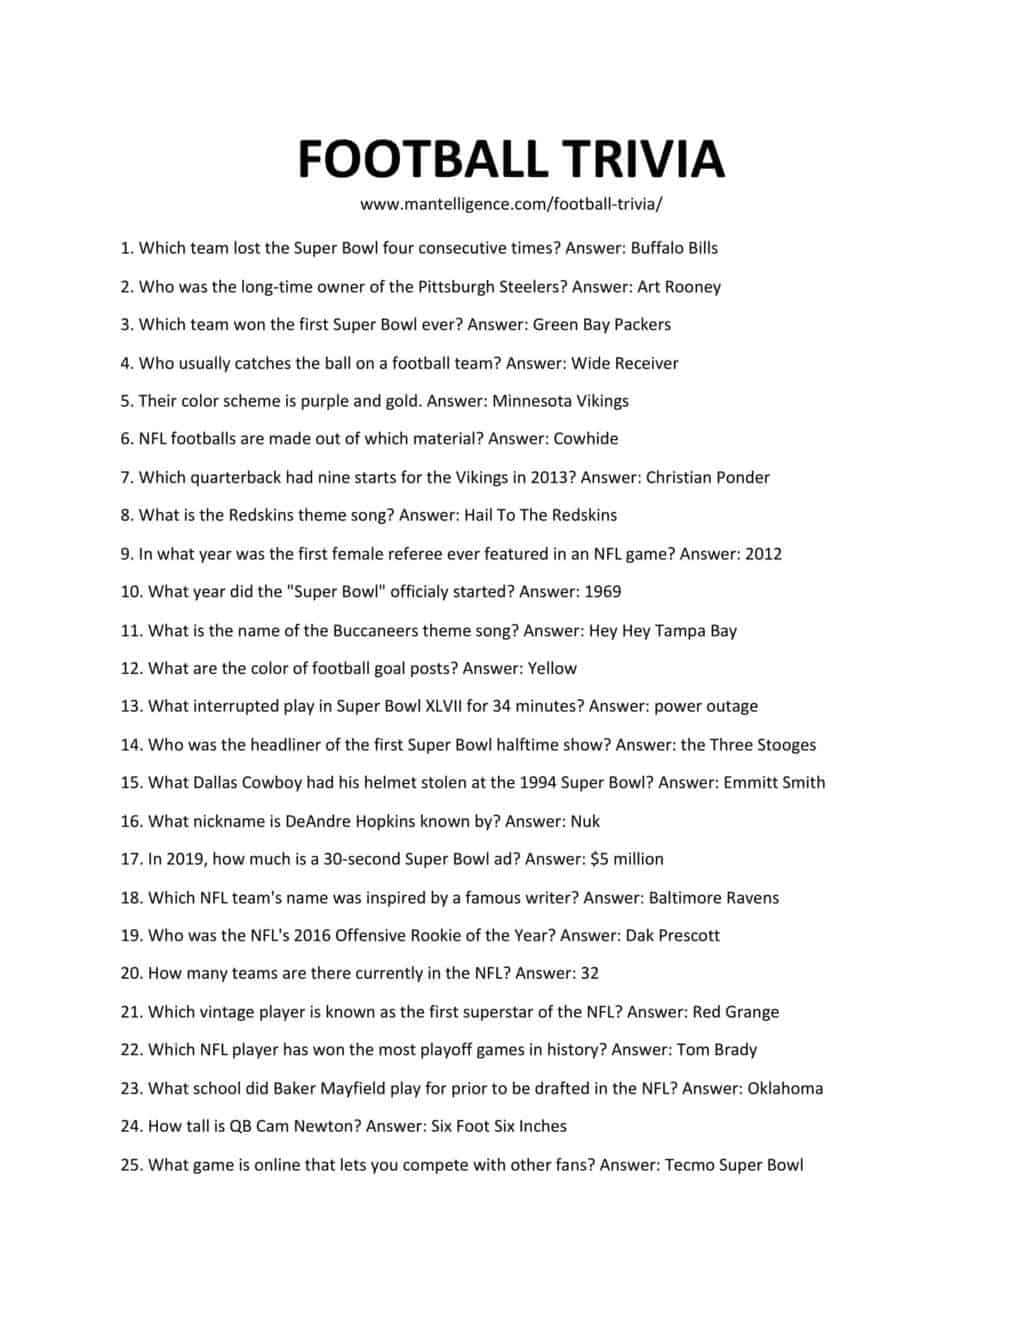 36 Best Football Trivia Questions And Answers Spark fun conversations.